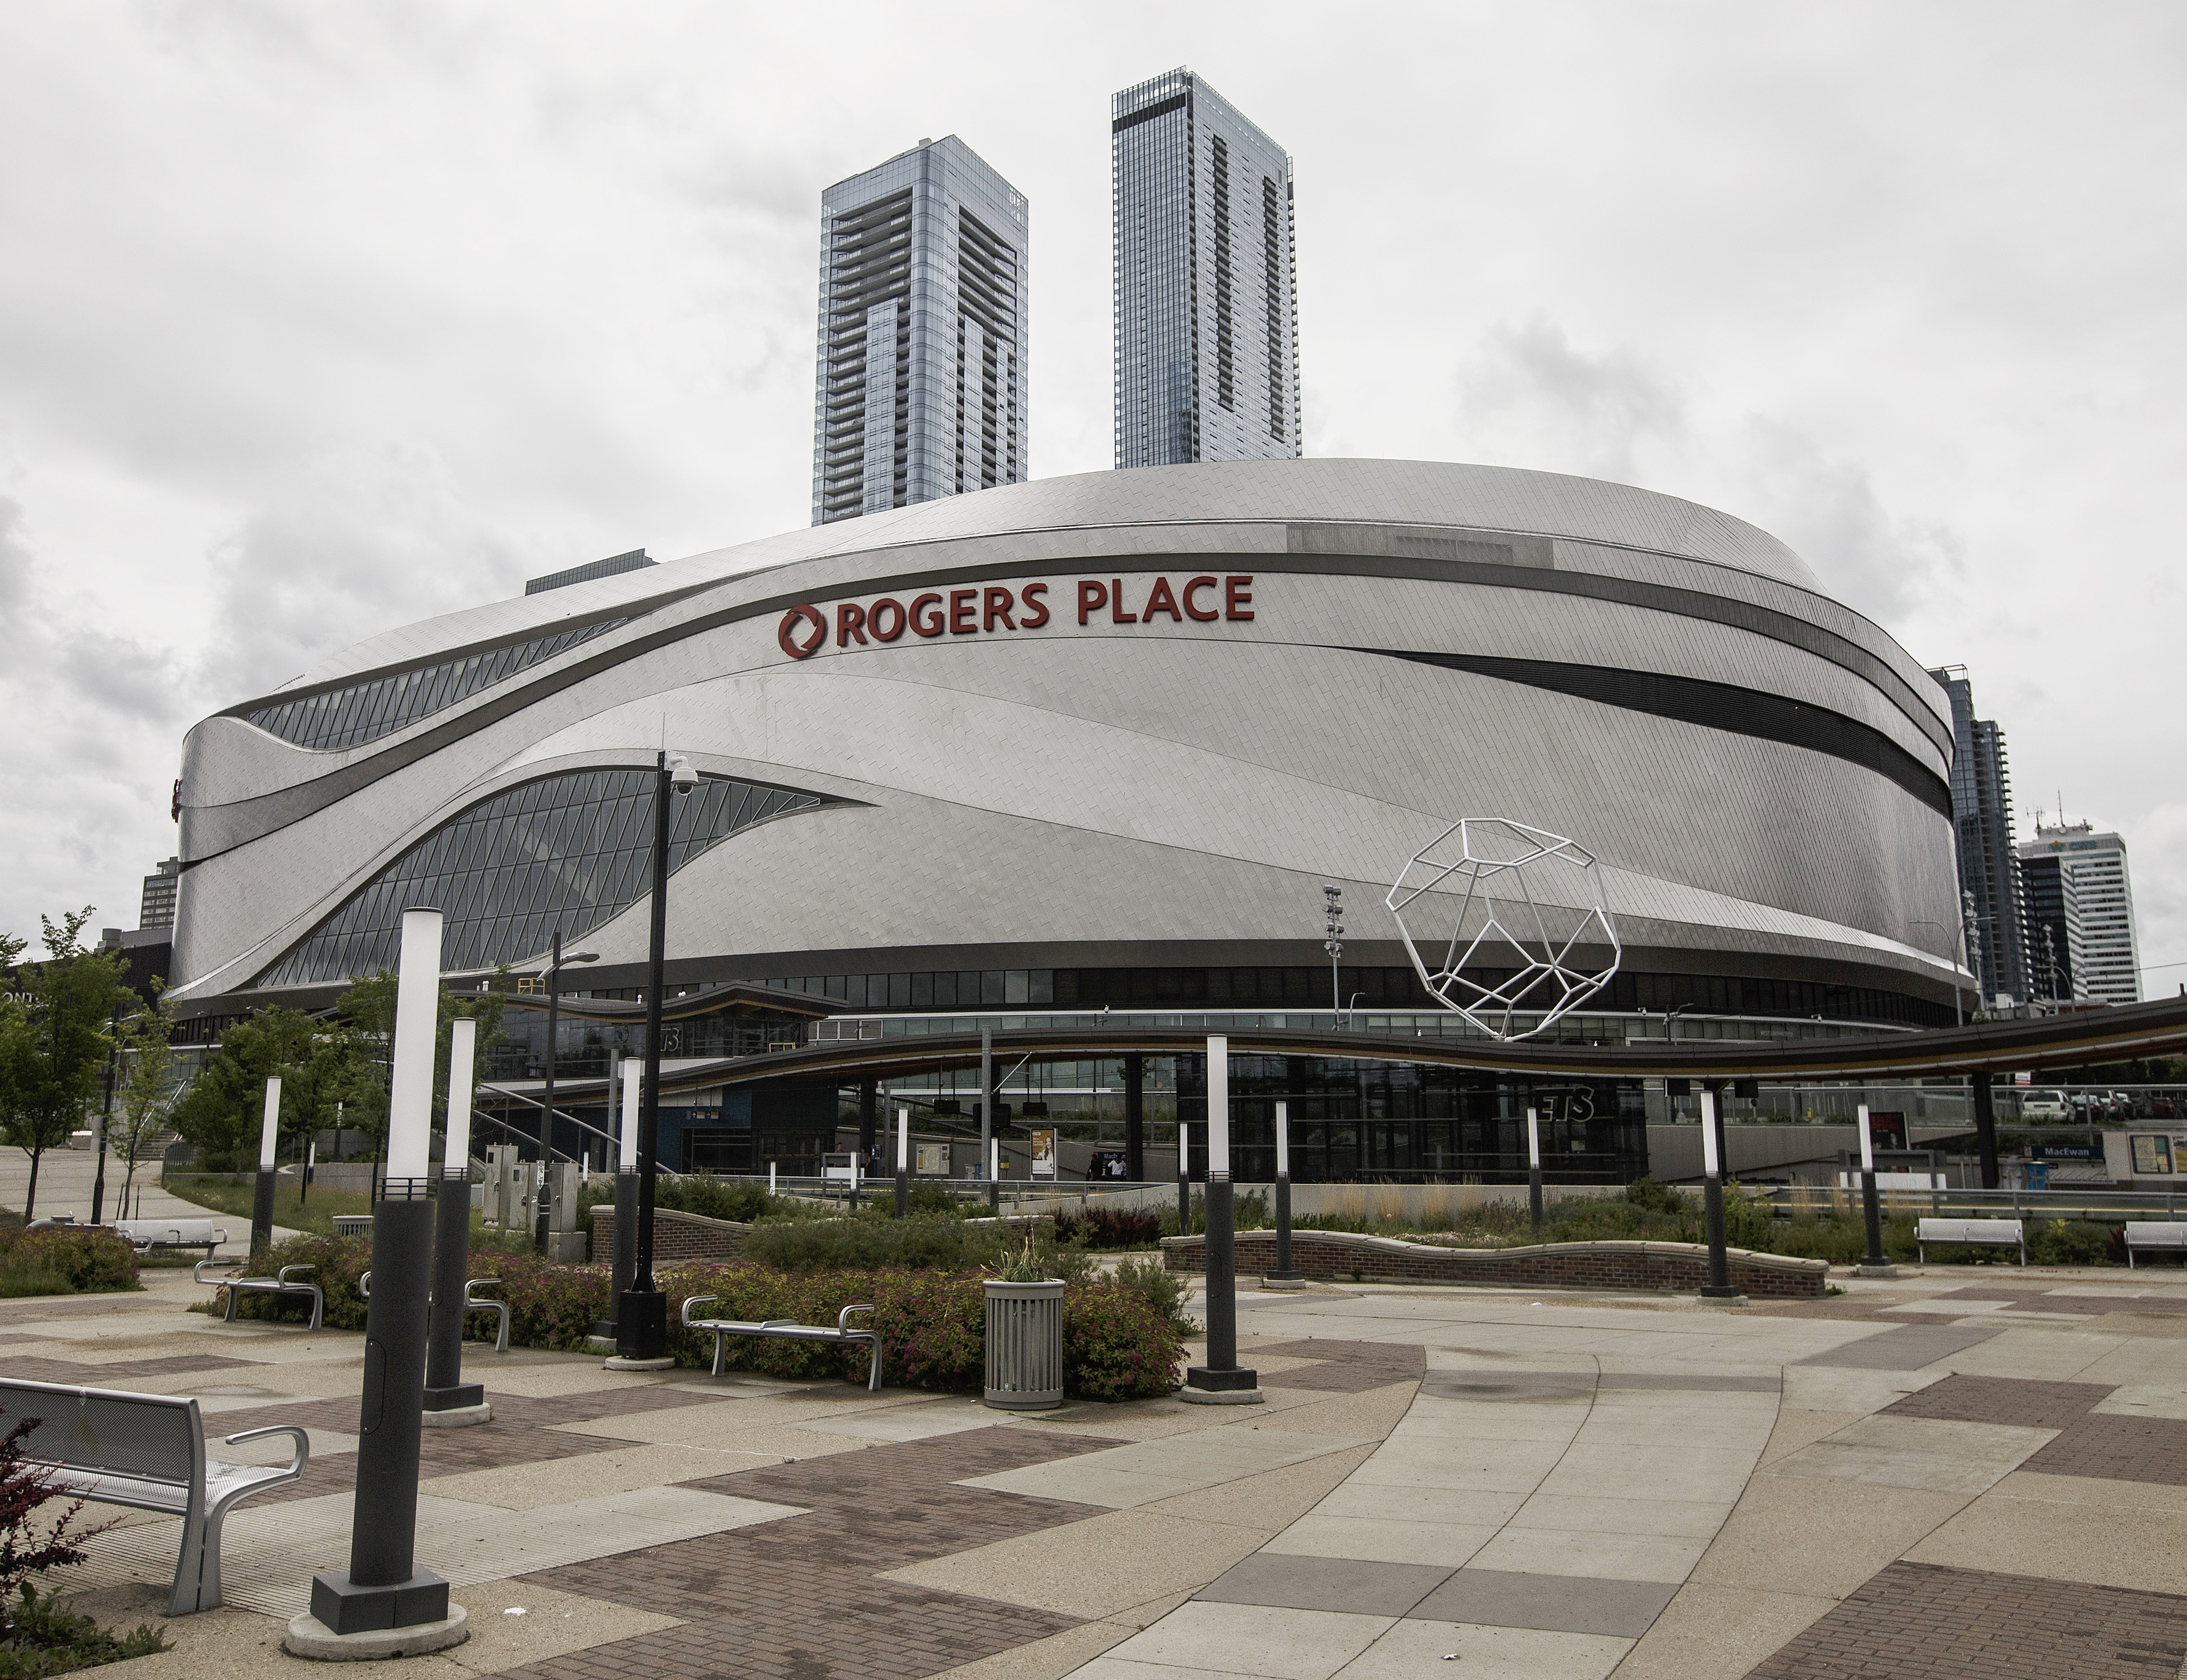 Home of the NHL's Edmonton Oilers Rogers Place arena is shown in Edmonton, Alta., on Thursday July 2, 2020. THE CANADIAN PRESS/Jason Franson